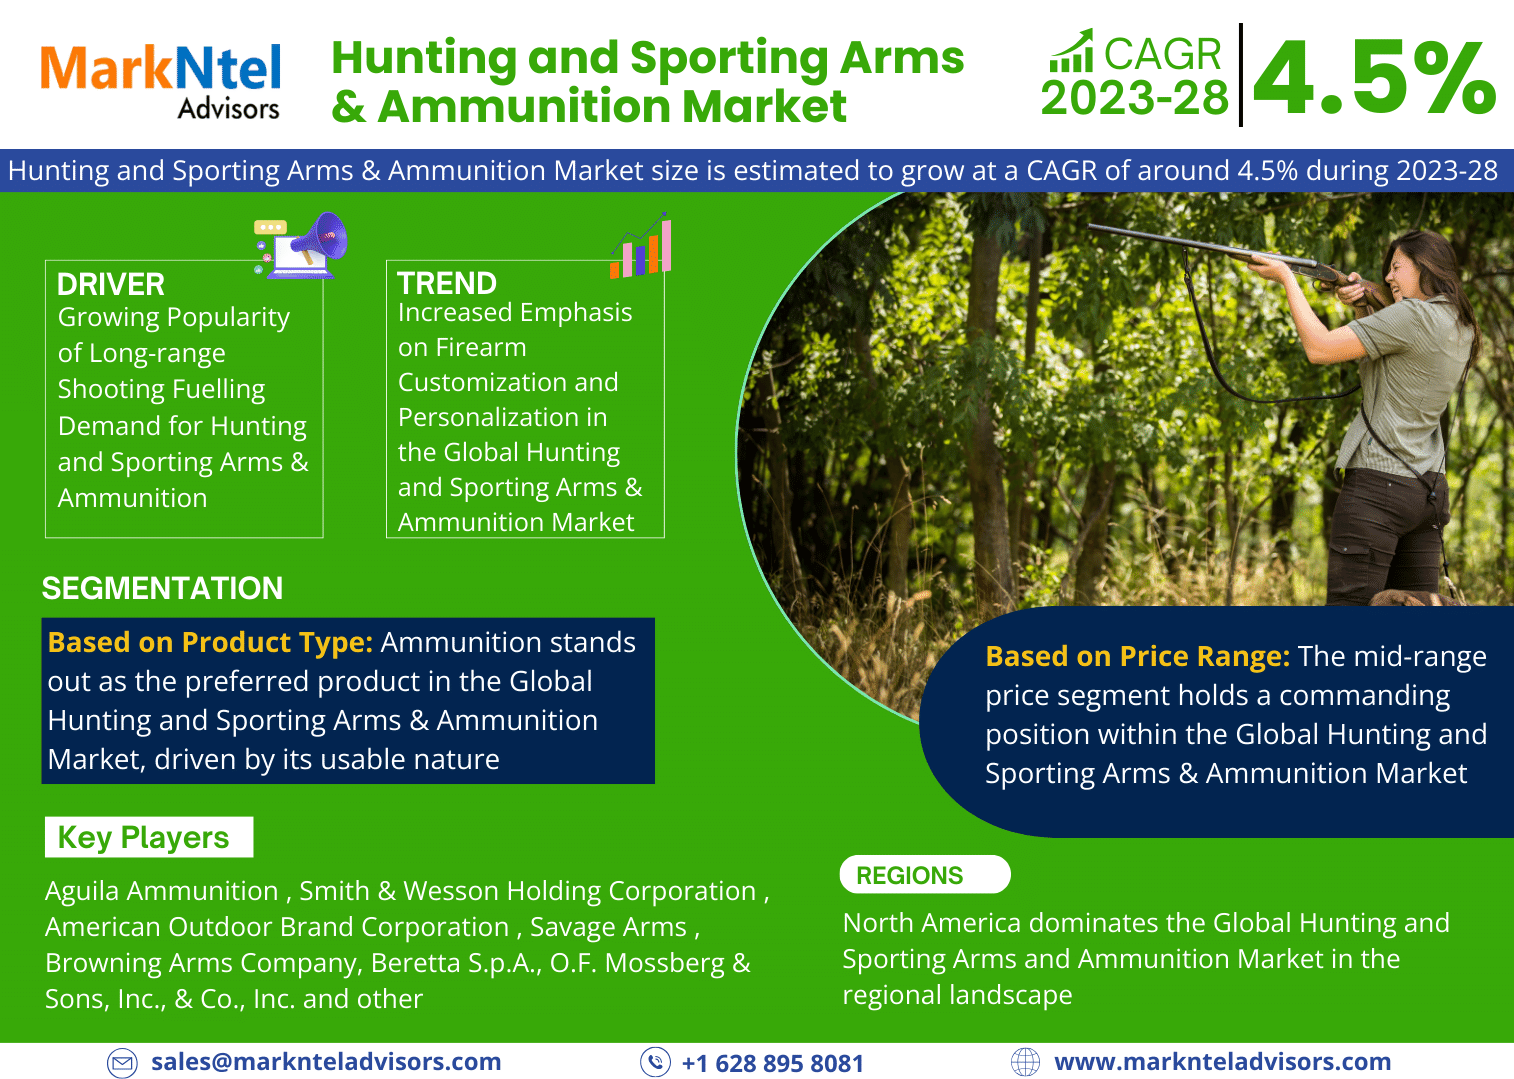 Global Hunting and Sporting Arms & Ammunition Market